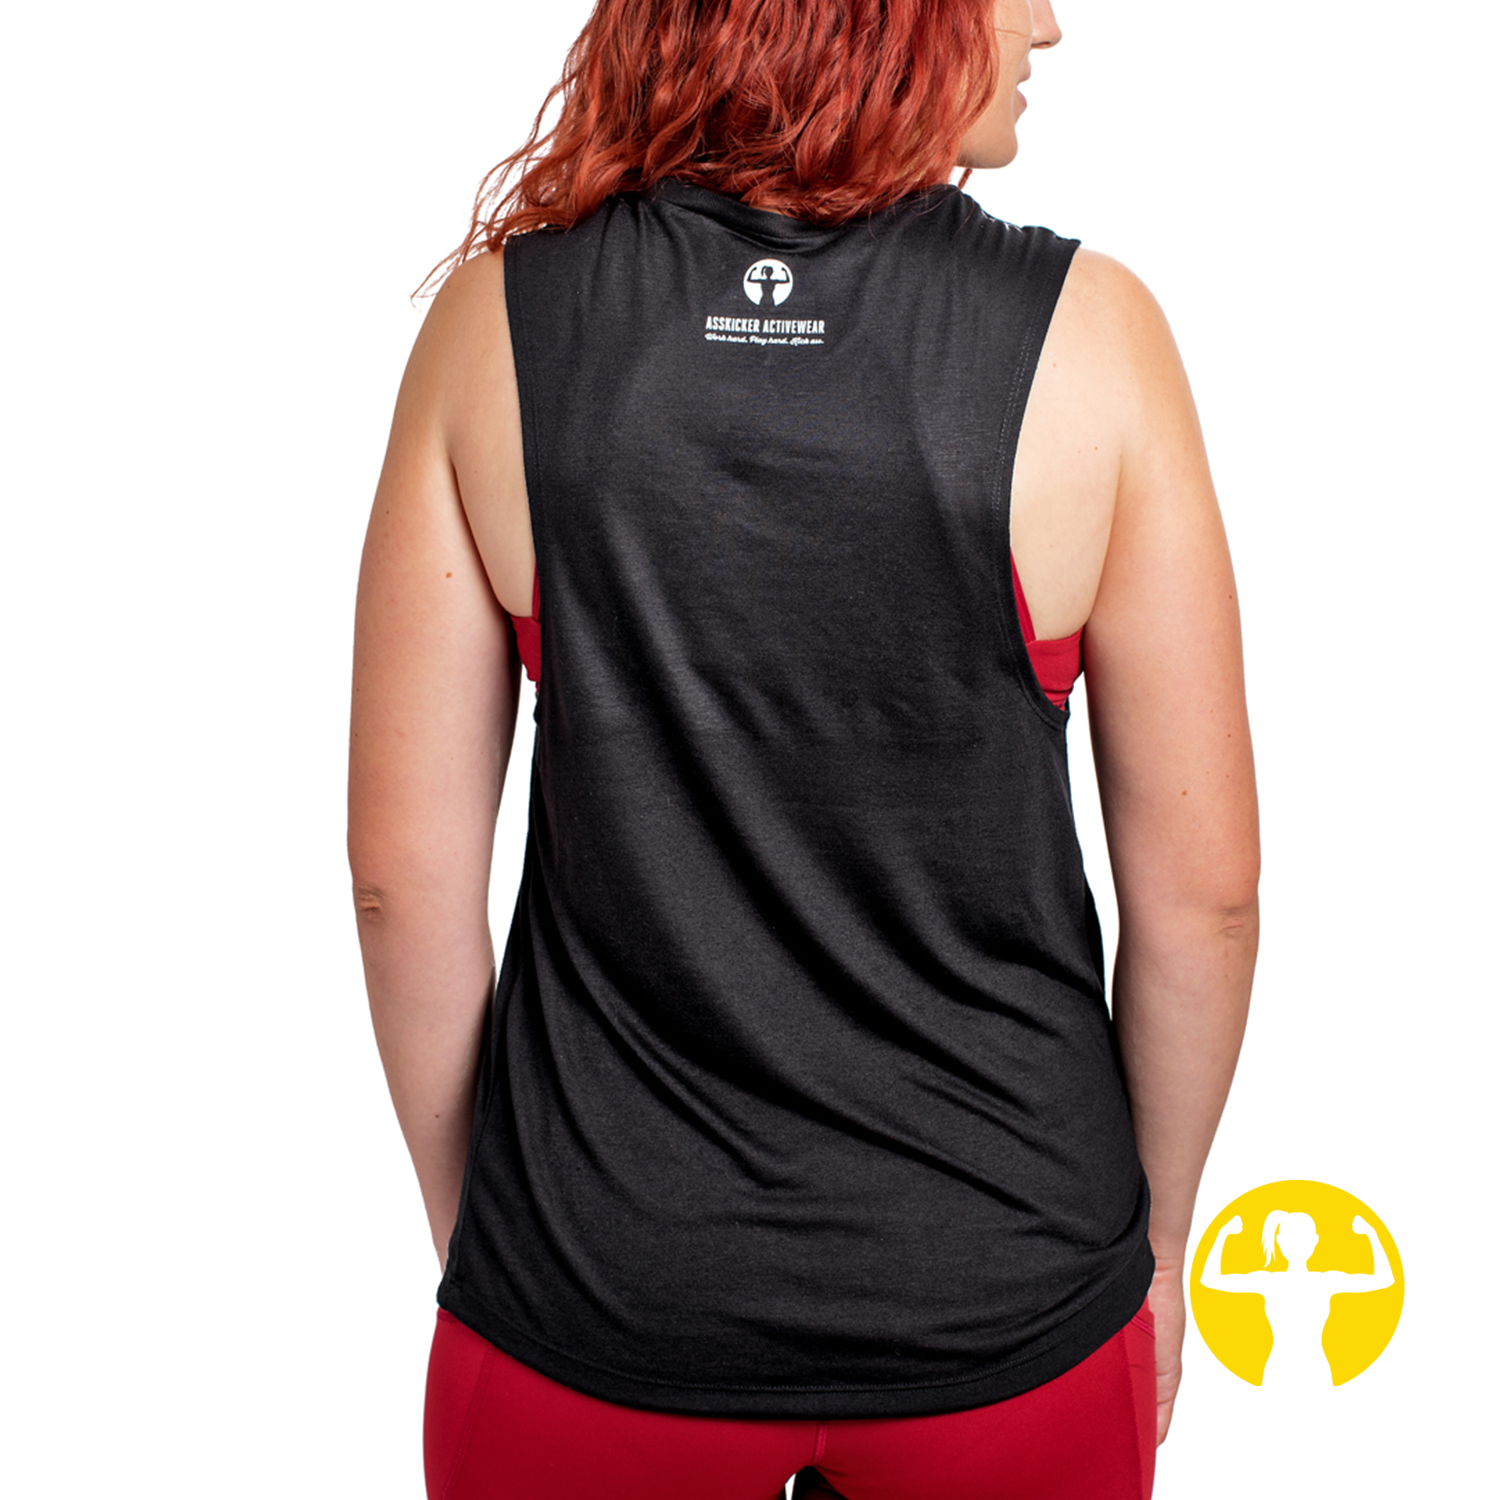 Quality gym wear and casual apparel for women. Flowy muscle tank tops with empowering messages from Asskicker Activewear in Barrie, Ontario Canada. Free shipping available.